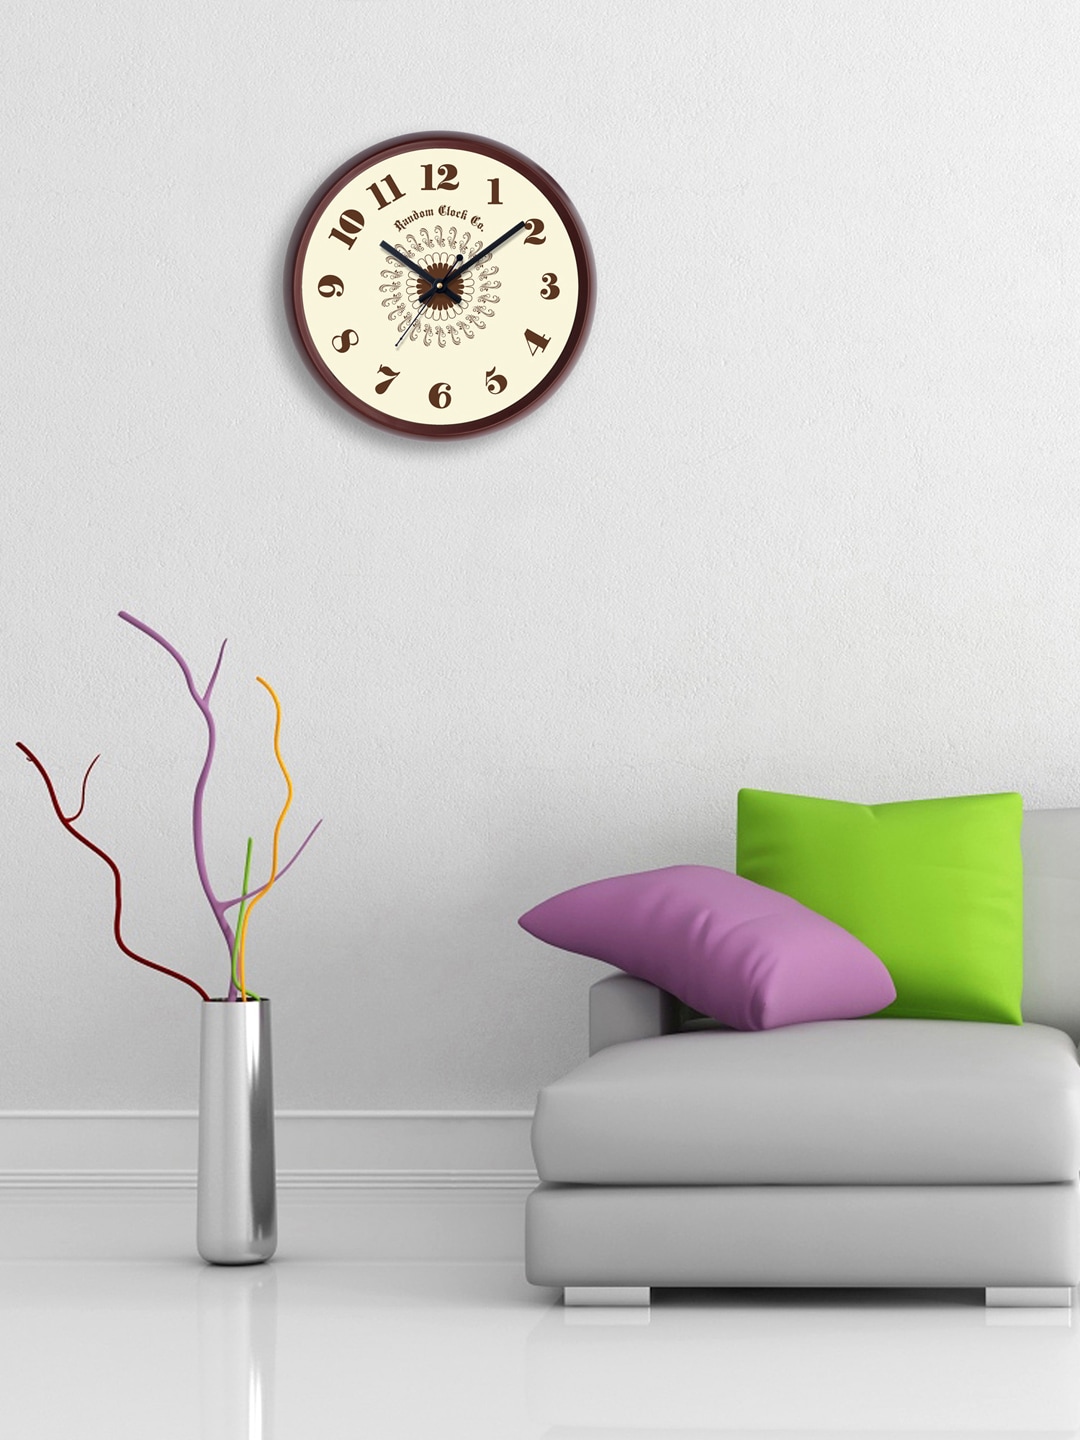 RANDOM Beige & Brown Round Analogue Wall Clock Price in India